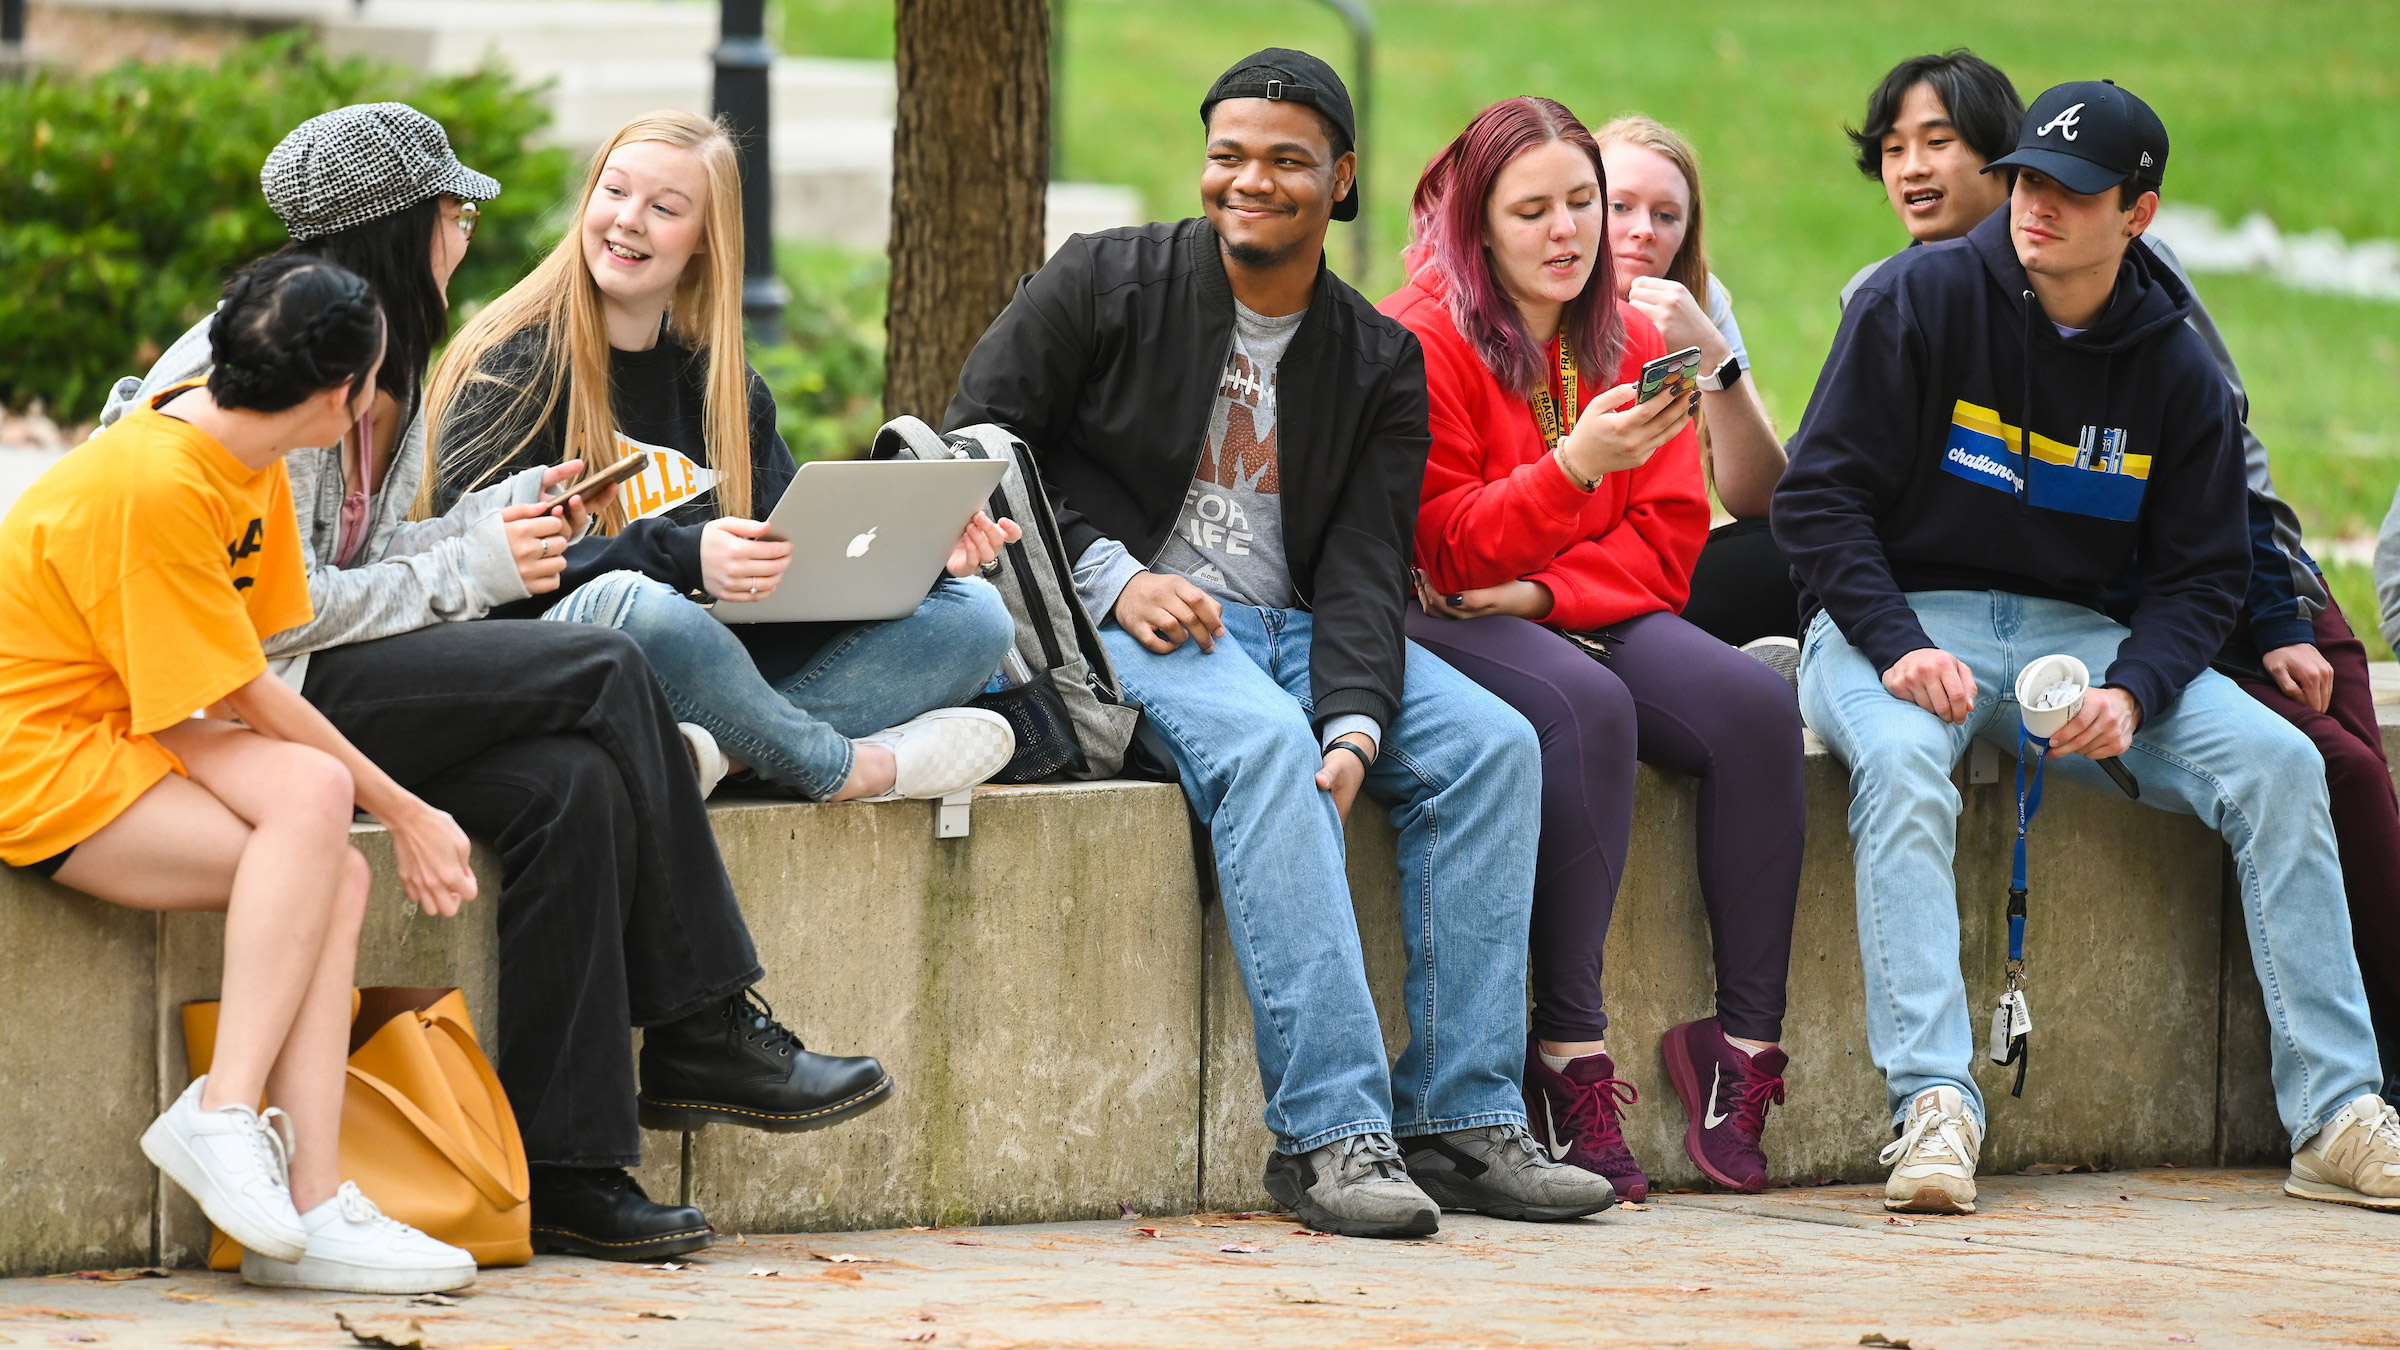 A group of students at UTC share jokes and conversation